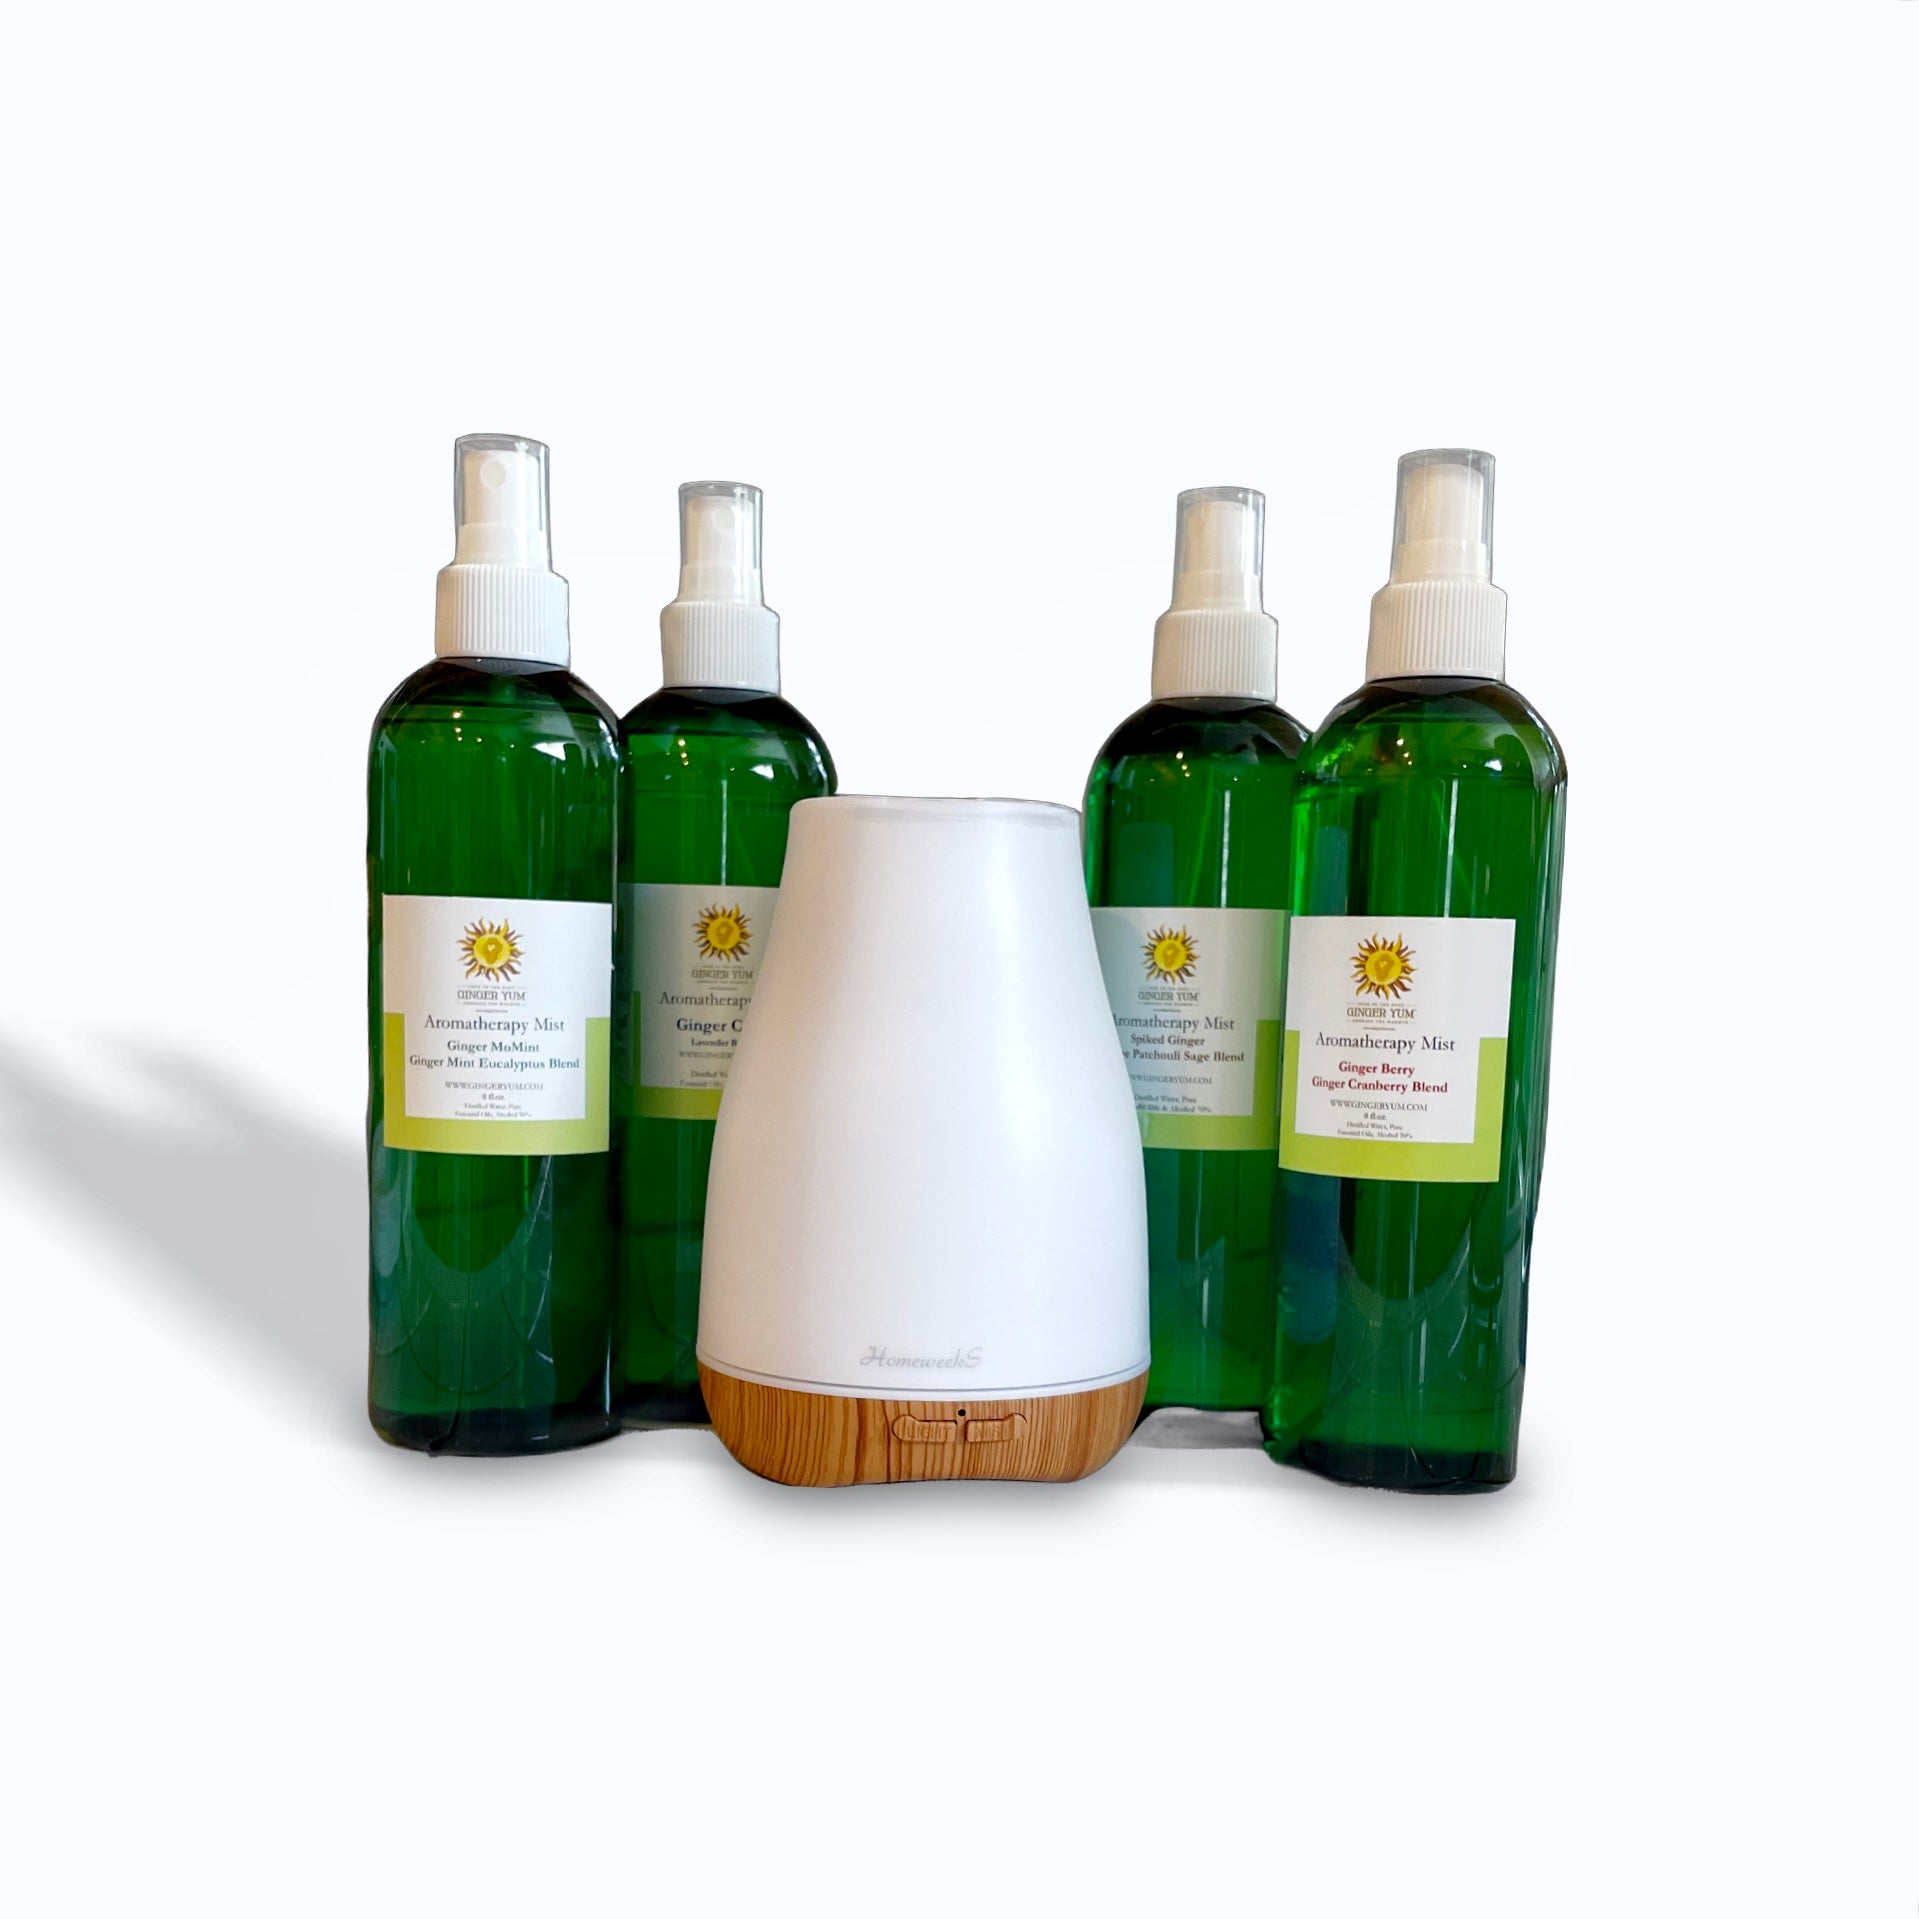 Aroma Therapy Mist/Diffuser Set